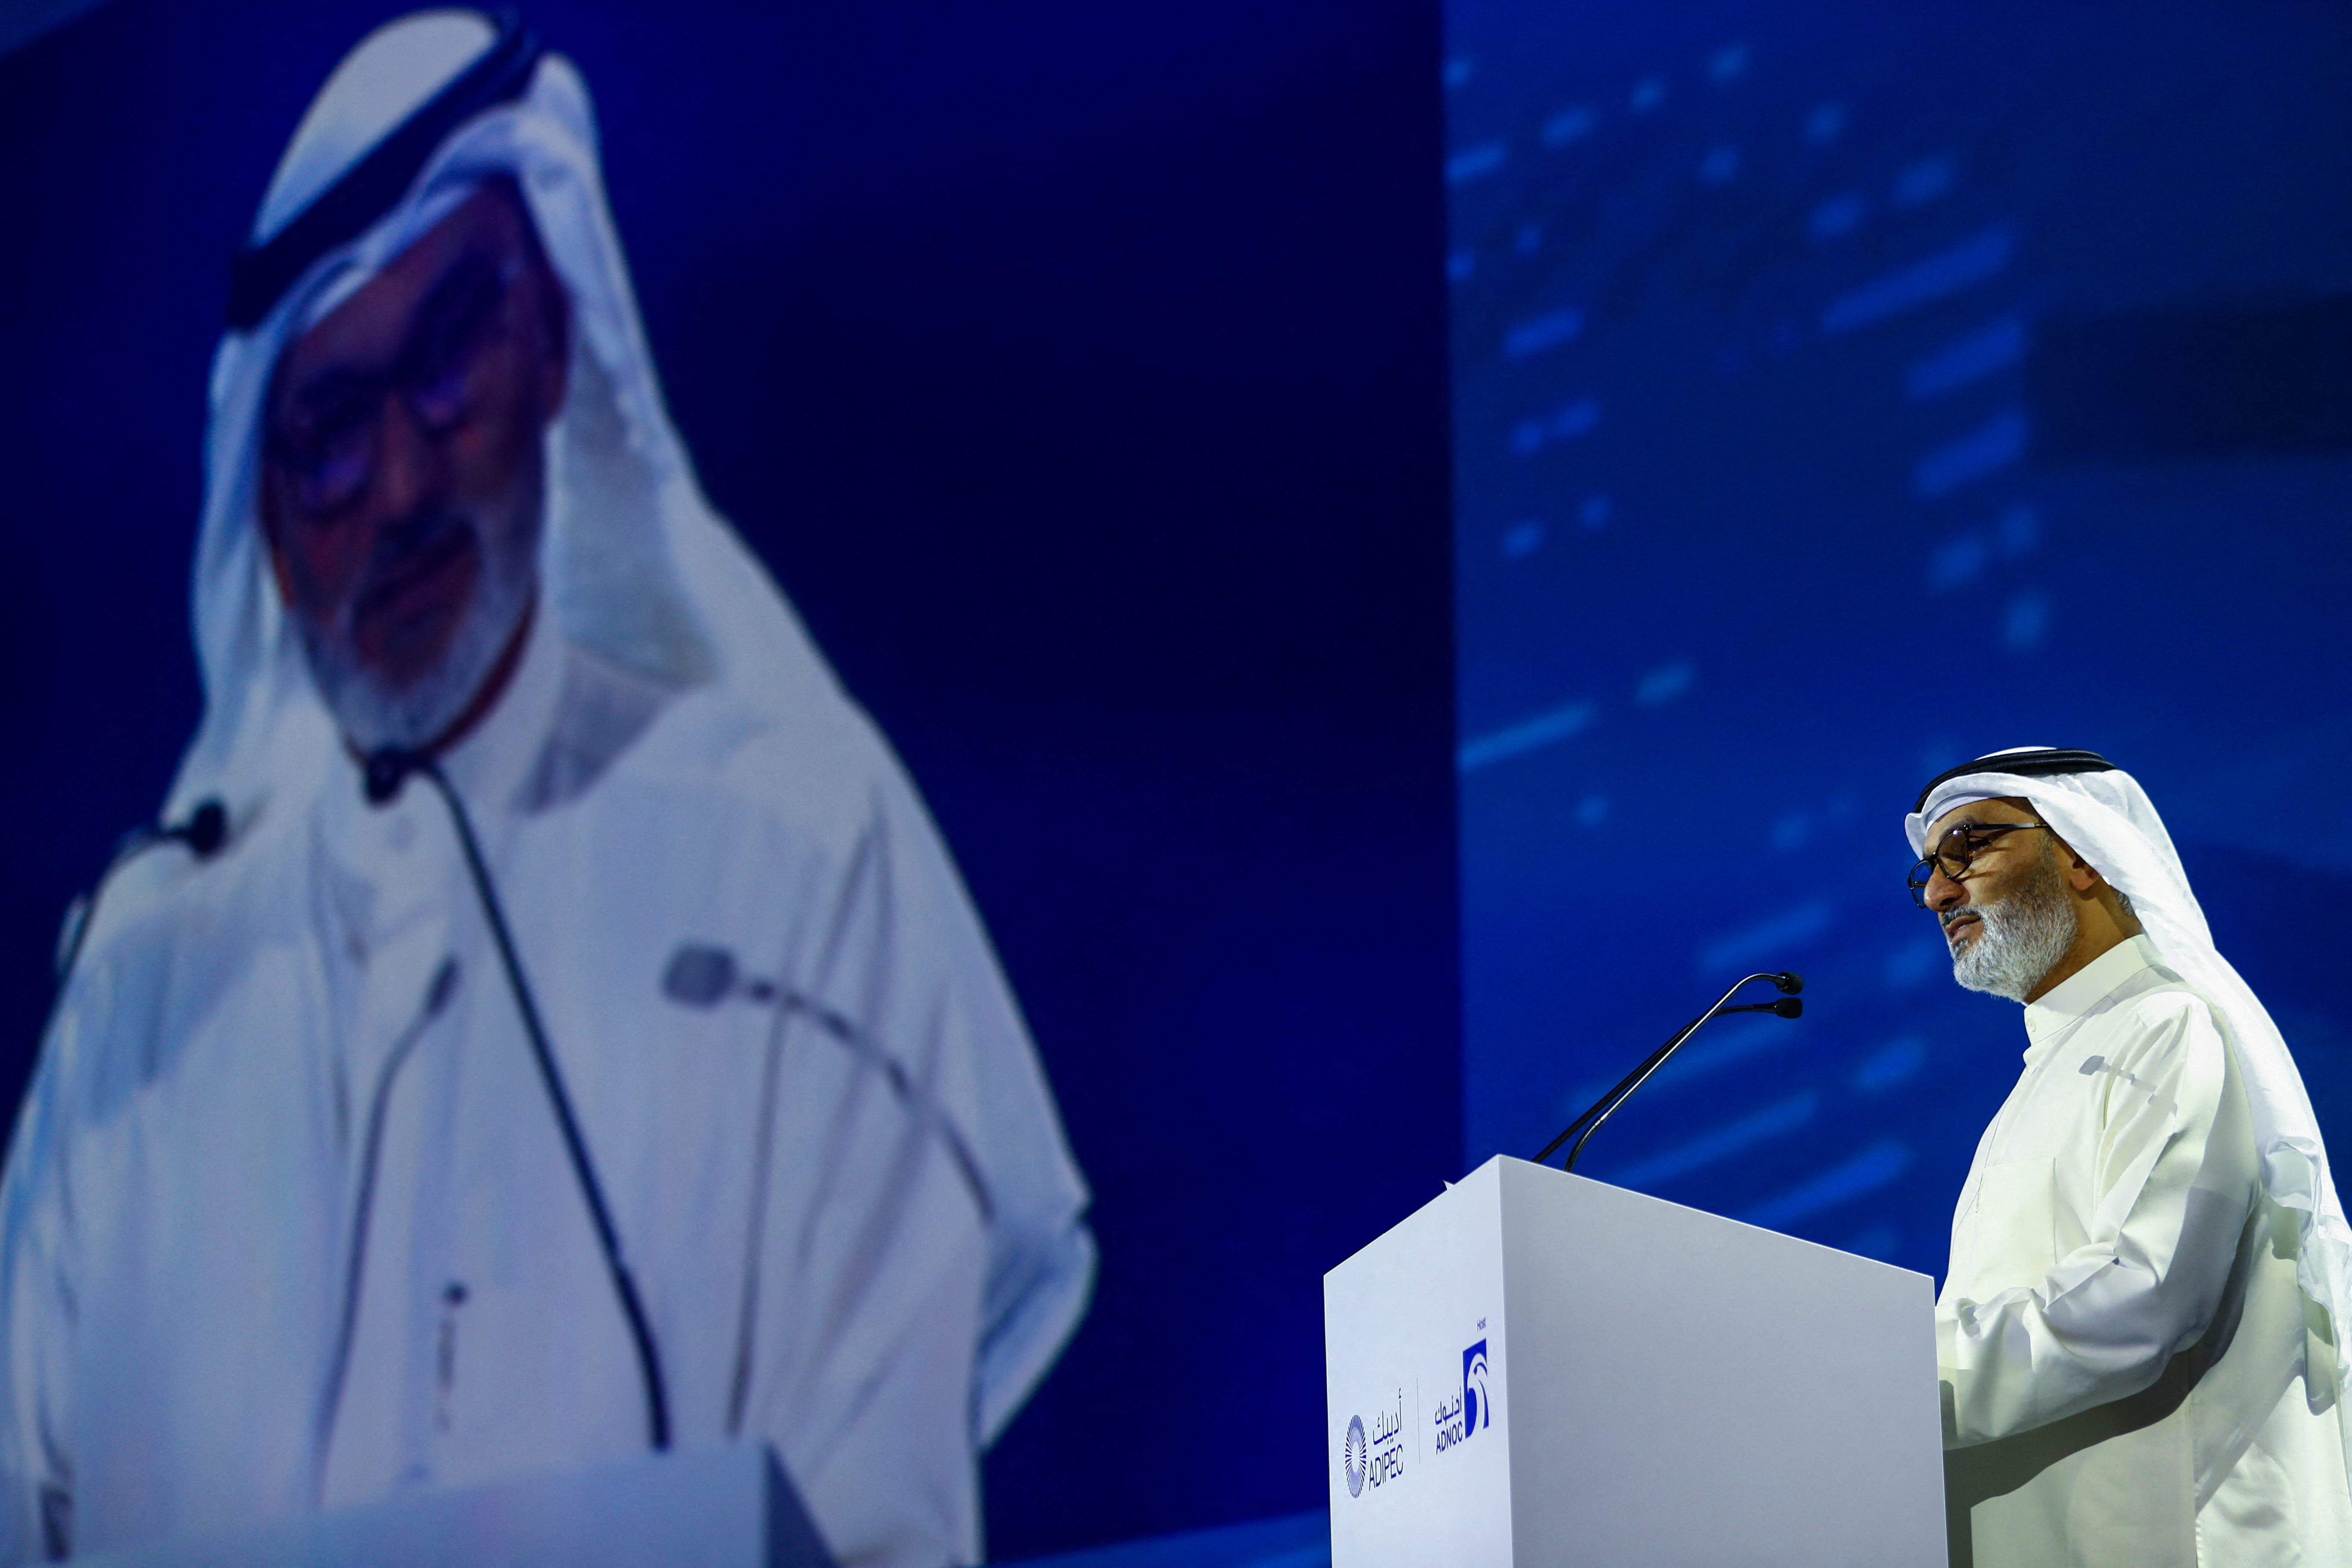 Kuwait's Haitham Al Ghais, Secretary-General of the Organisation of the Petroleum Exporting Countries (OPEC) speaks during the Abu Dhabi International Petroleum Exhibition and Conference (ADIPEC) in Abu Dhabi